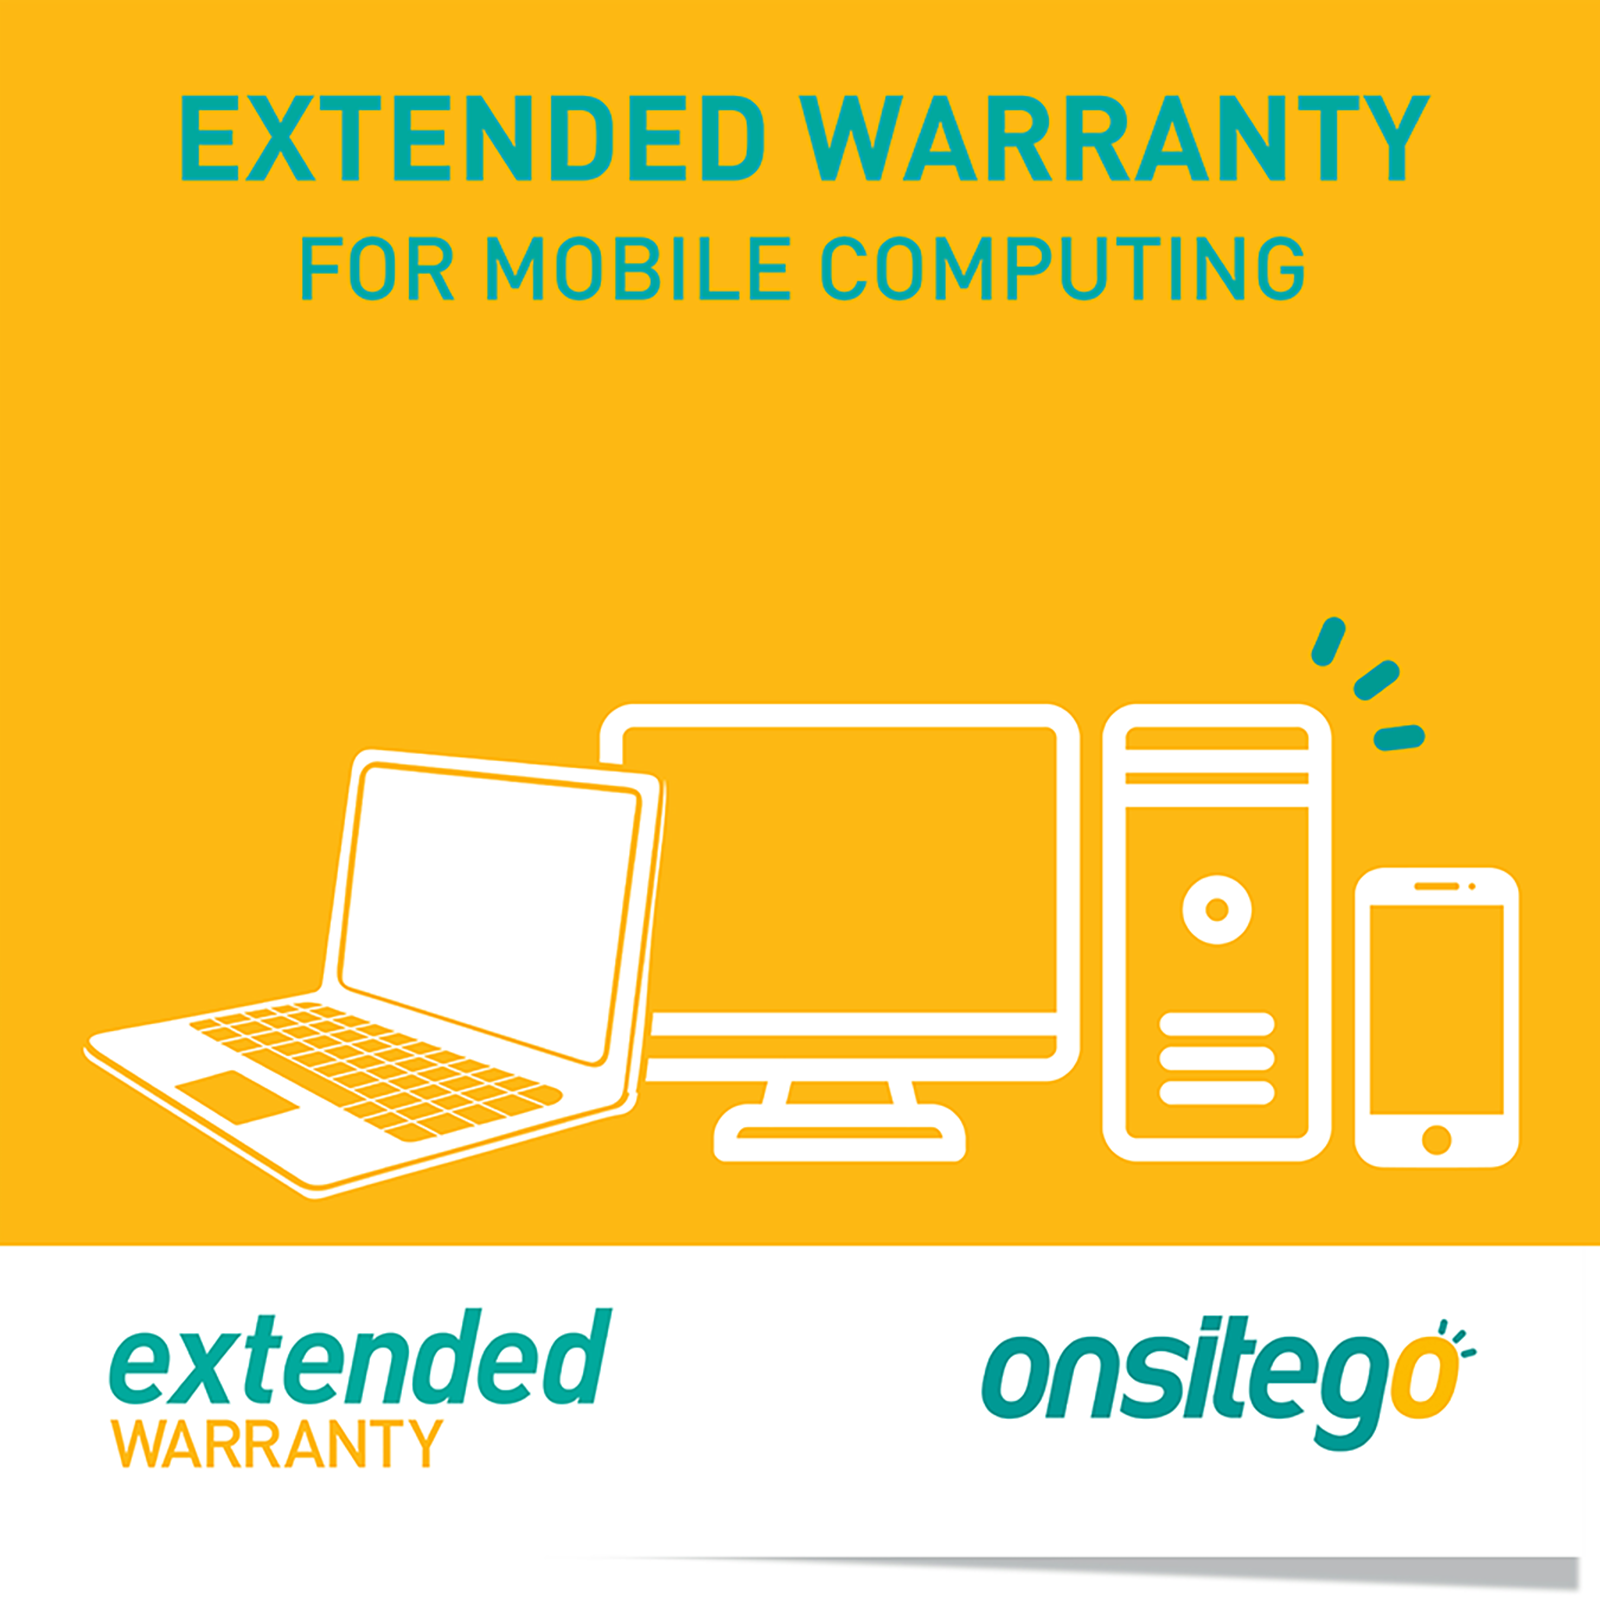 Onsitego 3 Year Extended Warranty for Laptop (Rs.35,000 - Rs.50,000)_1